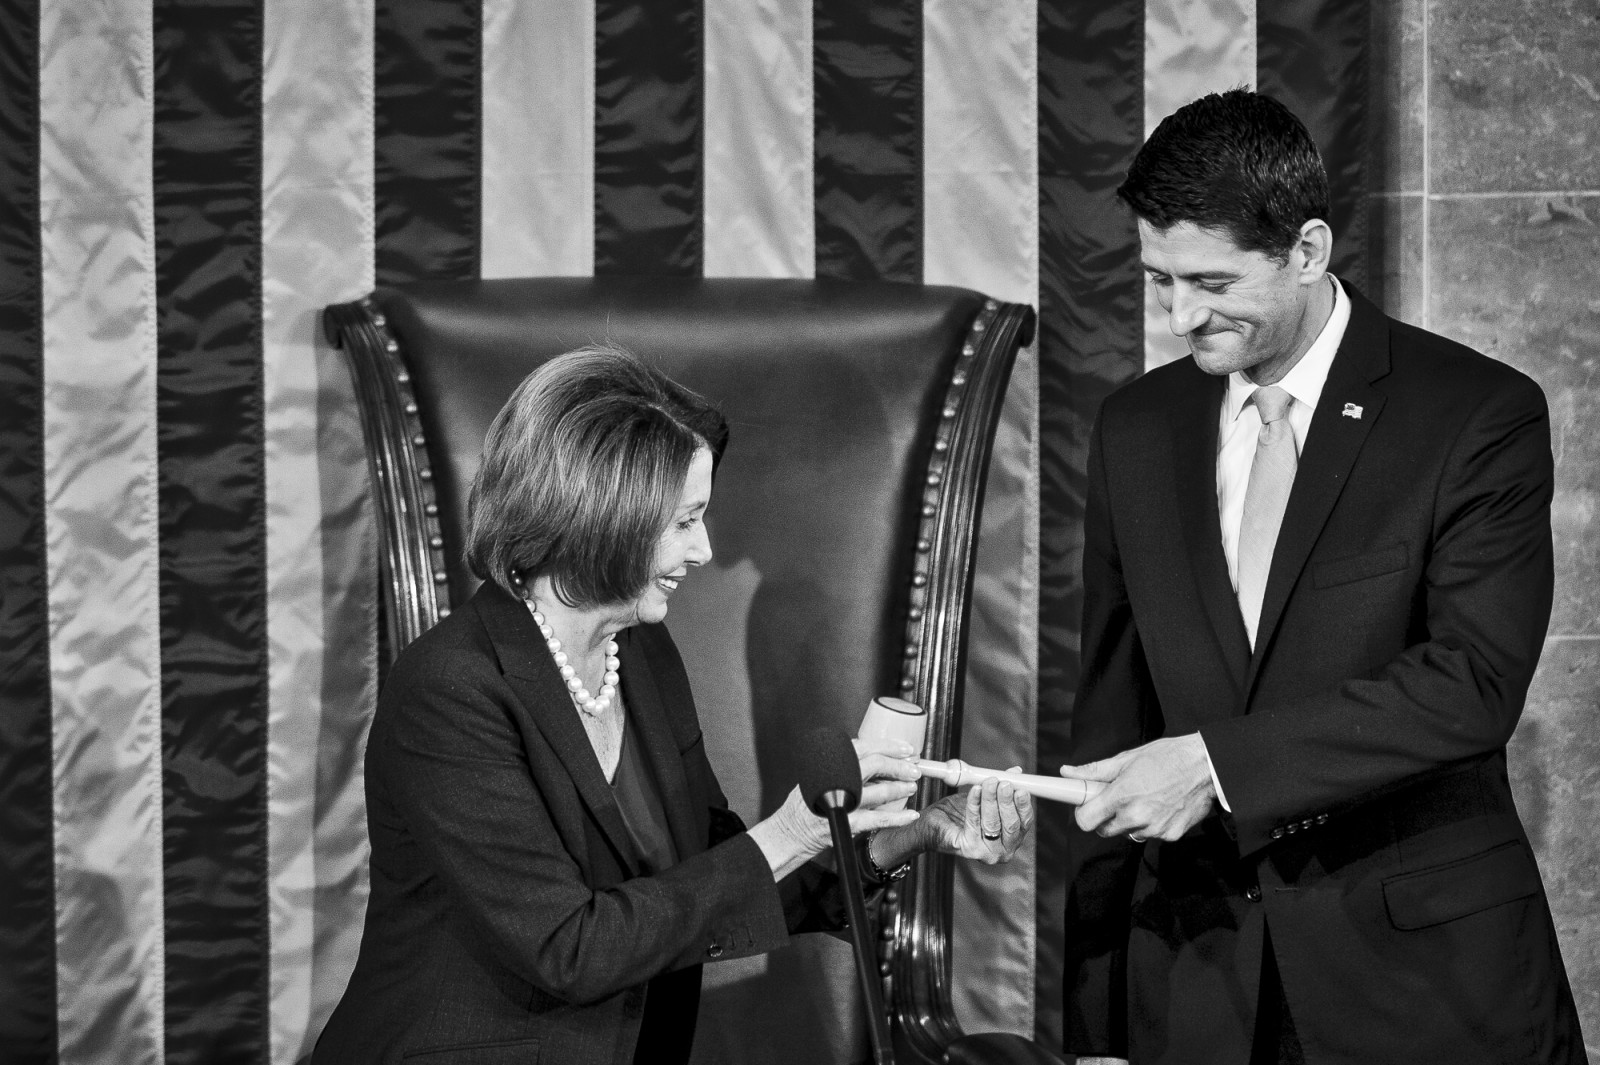 Democratic Minority Leader Nancy Pelosi passes the gavel to the 62nd Speaker of the House, Paul Ryan (R-WI) on October 29, 2015 in Washington, D.C. Earlier the outgoing Speaker, Rep. John Boehner (R-OH), gave his farewell address to Congress. He is retiring on October 30, 2015. Photo by Pete Marovich/UPI